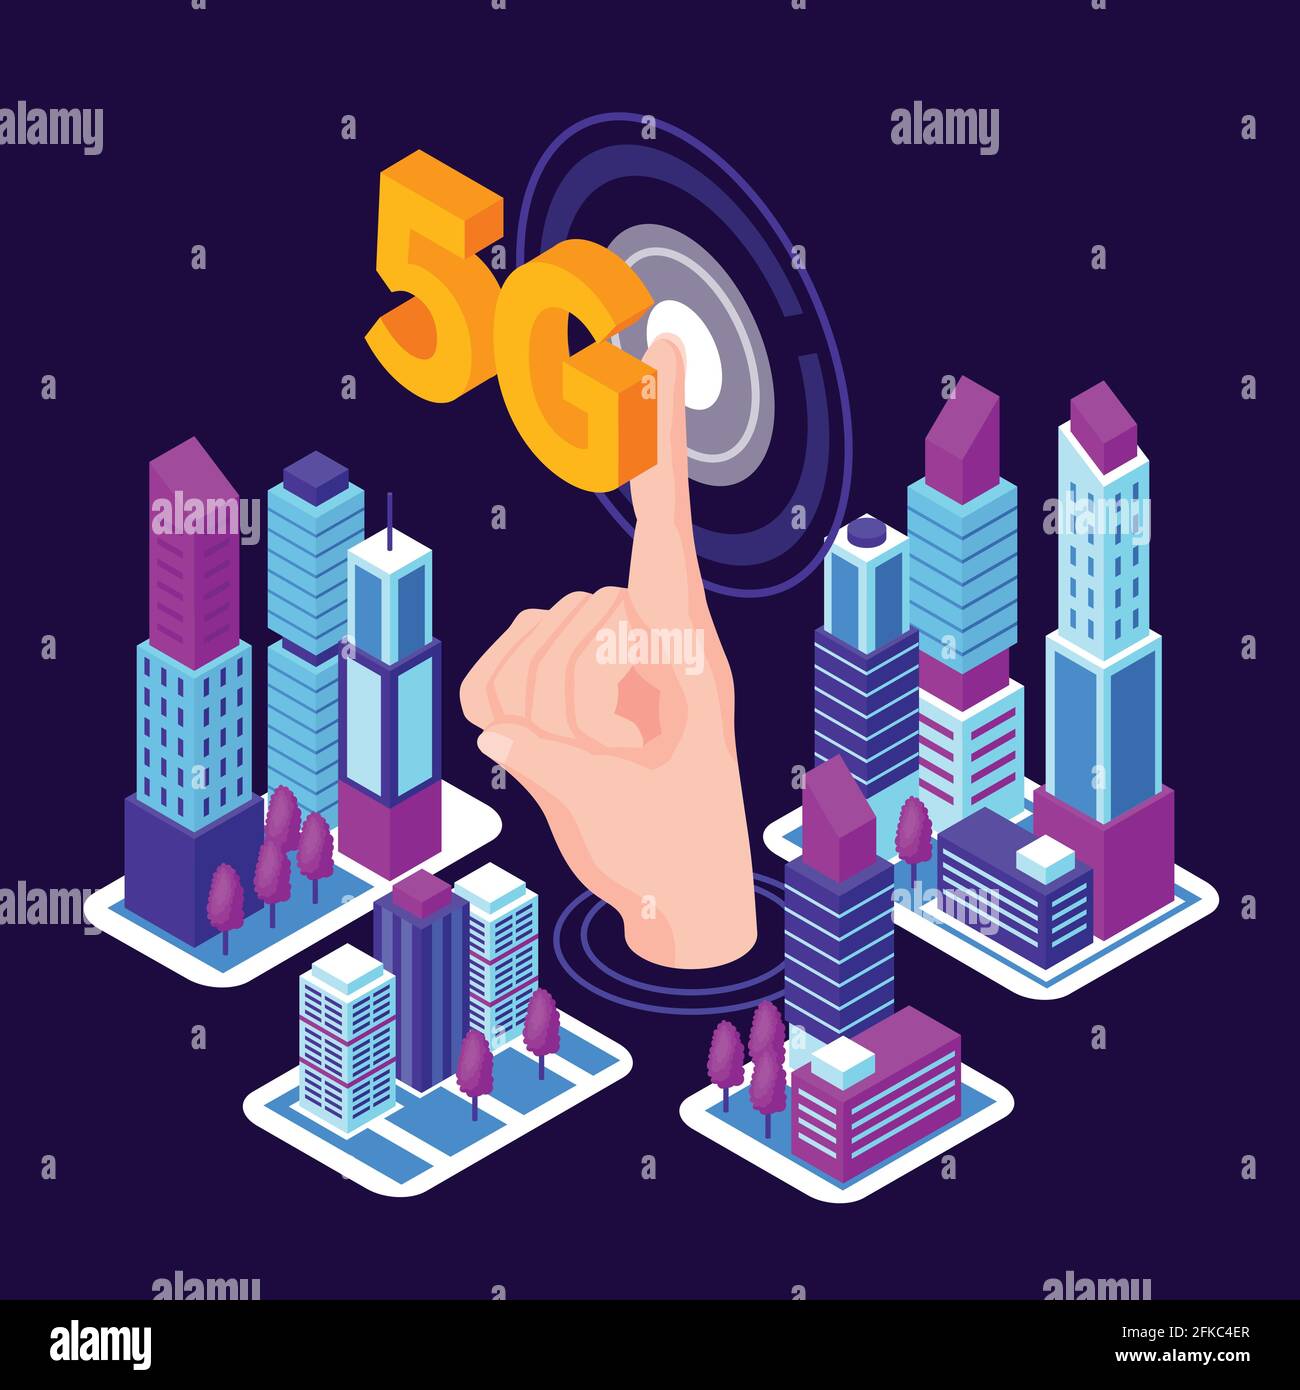 Isometric technologies future 5g internet composition with image of human finger pushing button with tall buildings skyscrapers vector illustration Stock Vector